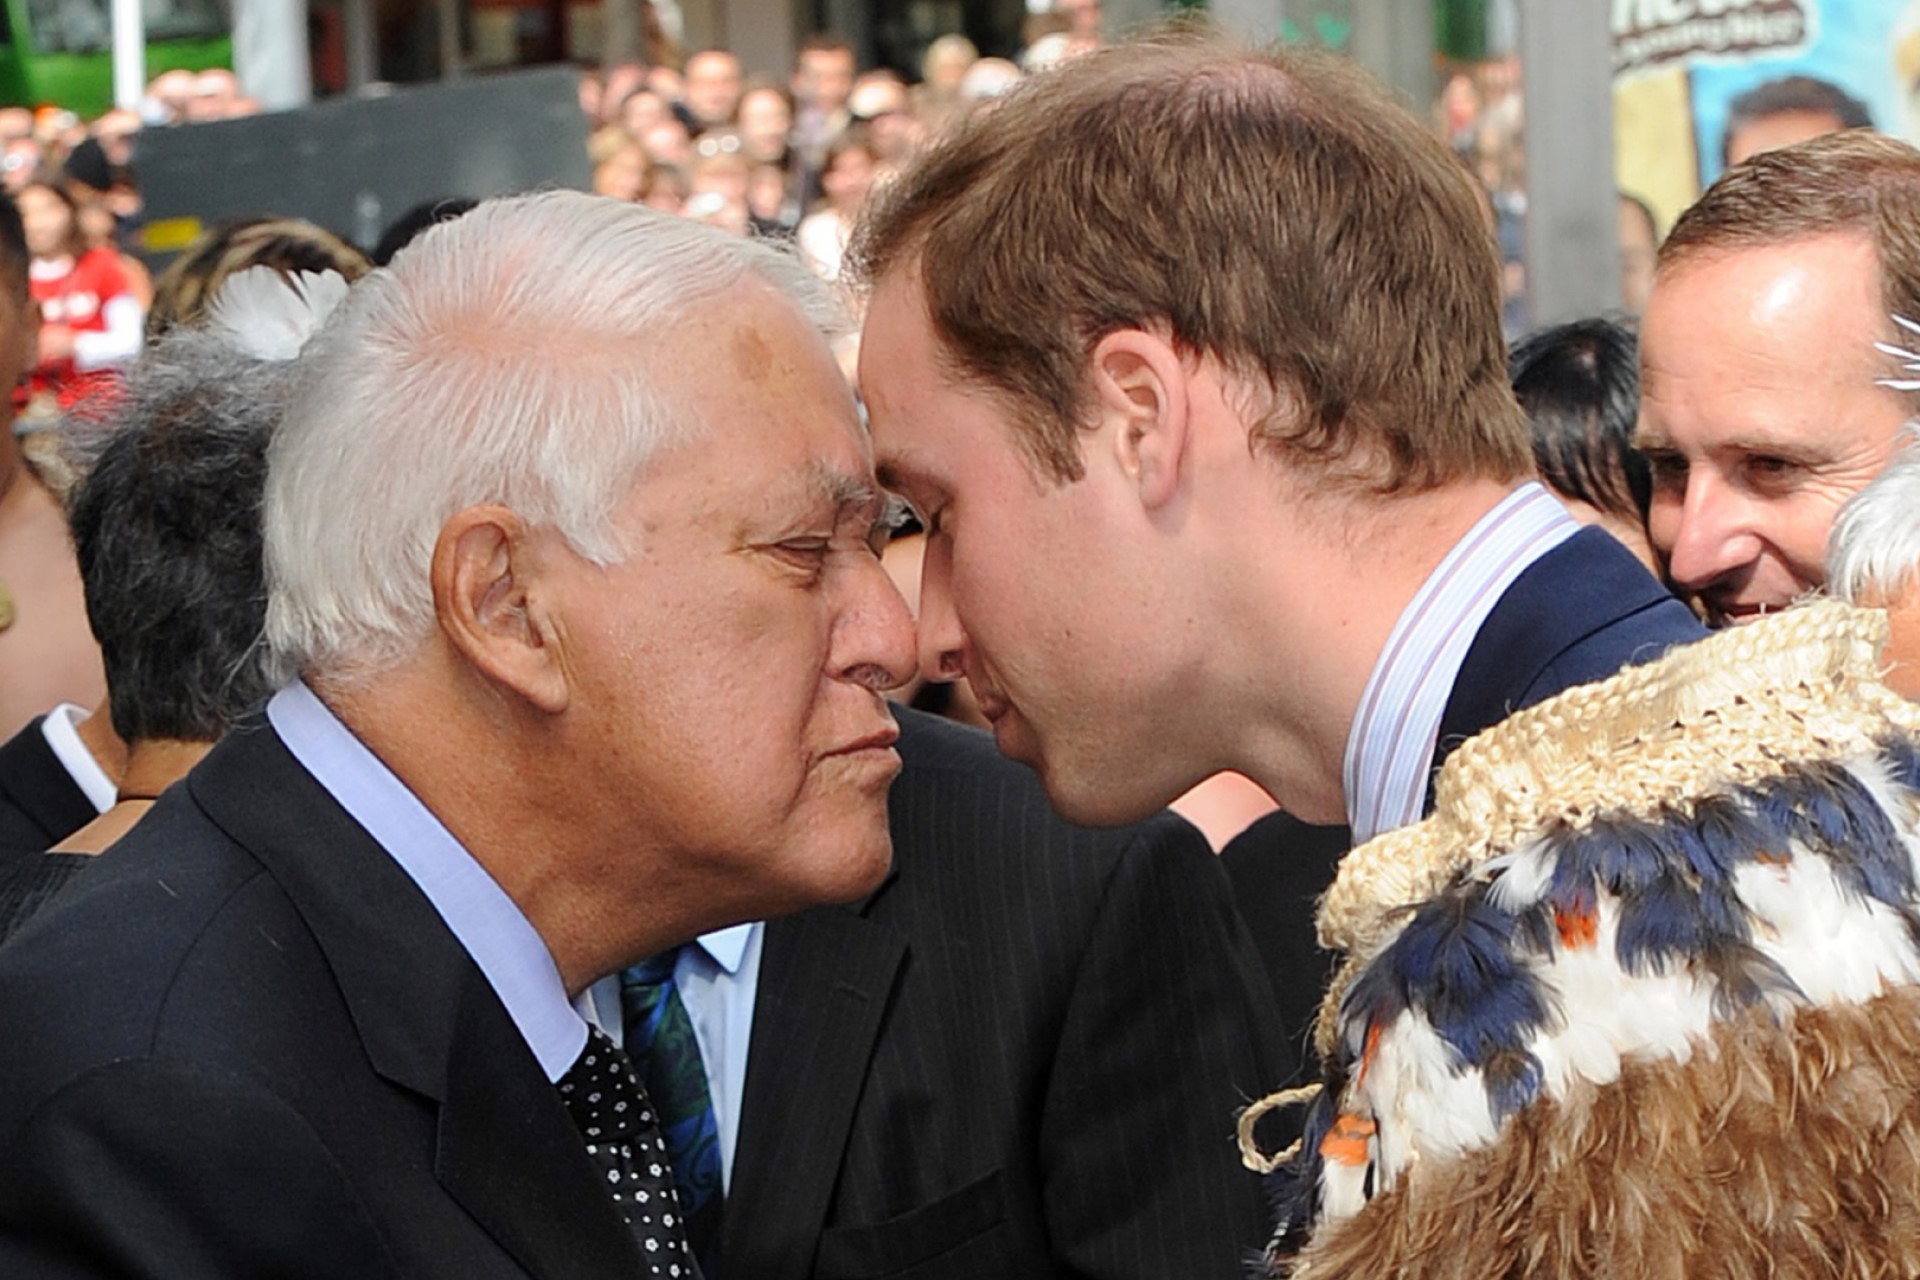 <p>Like father, like son. William, the Prince of Wales, also shared a fair number of hongi greetings when he visited New Zealand in 2010. This time with the former Gov. General, Sir Paul Reeves.</p>